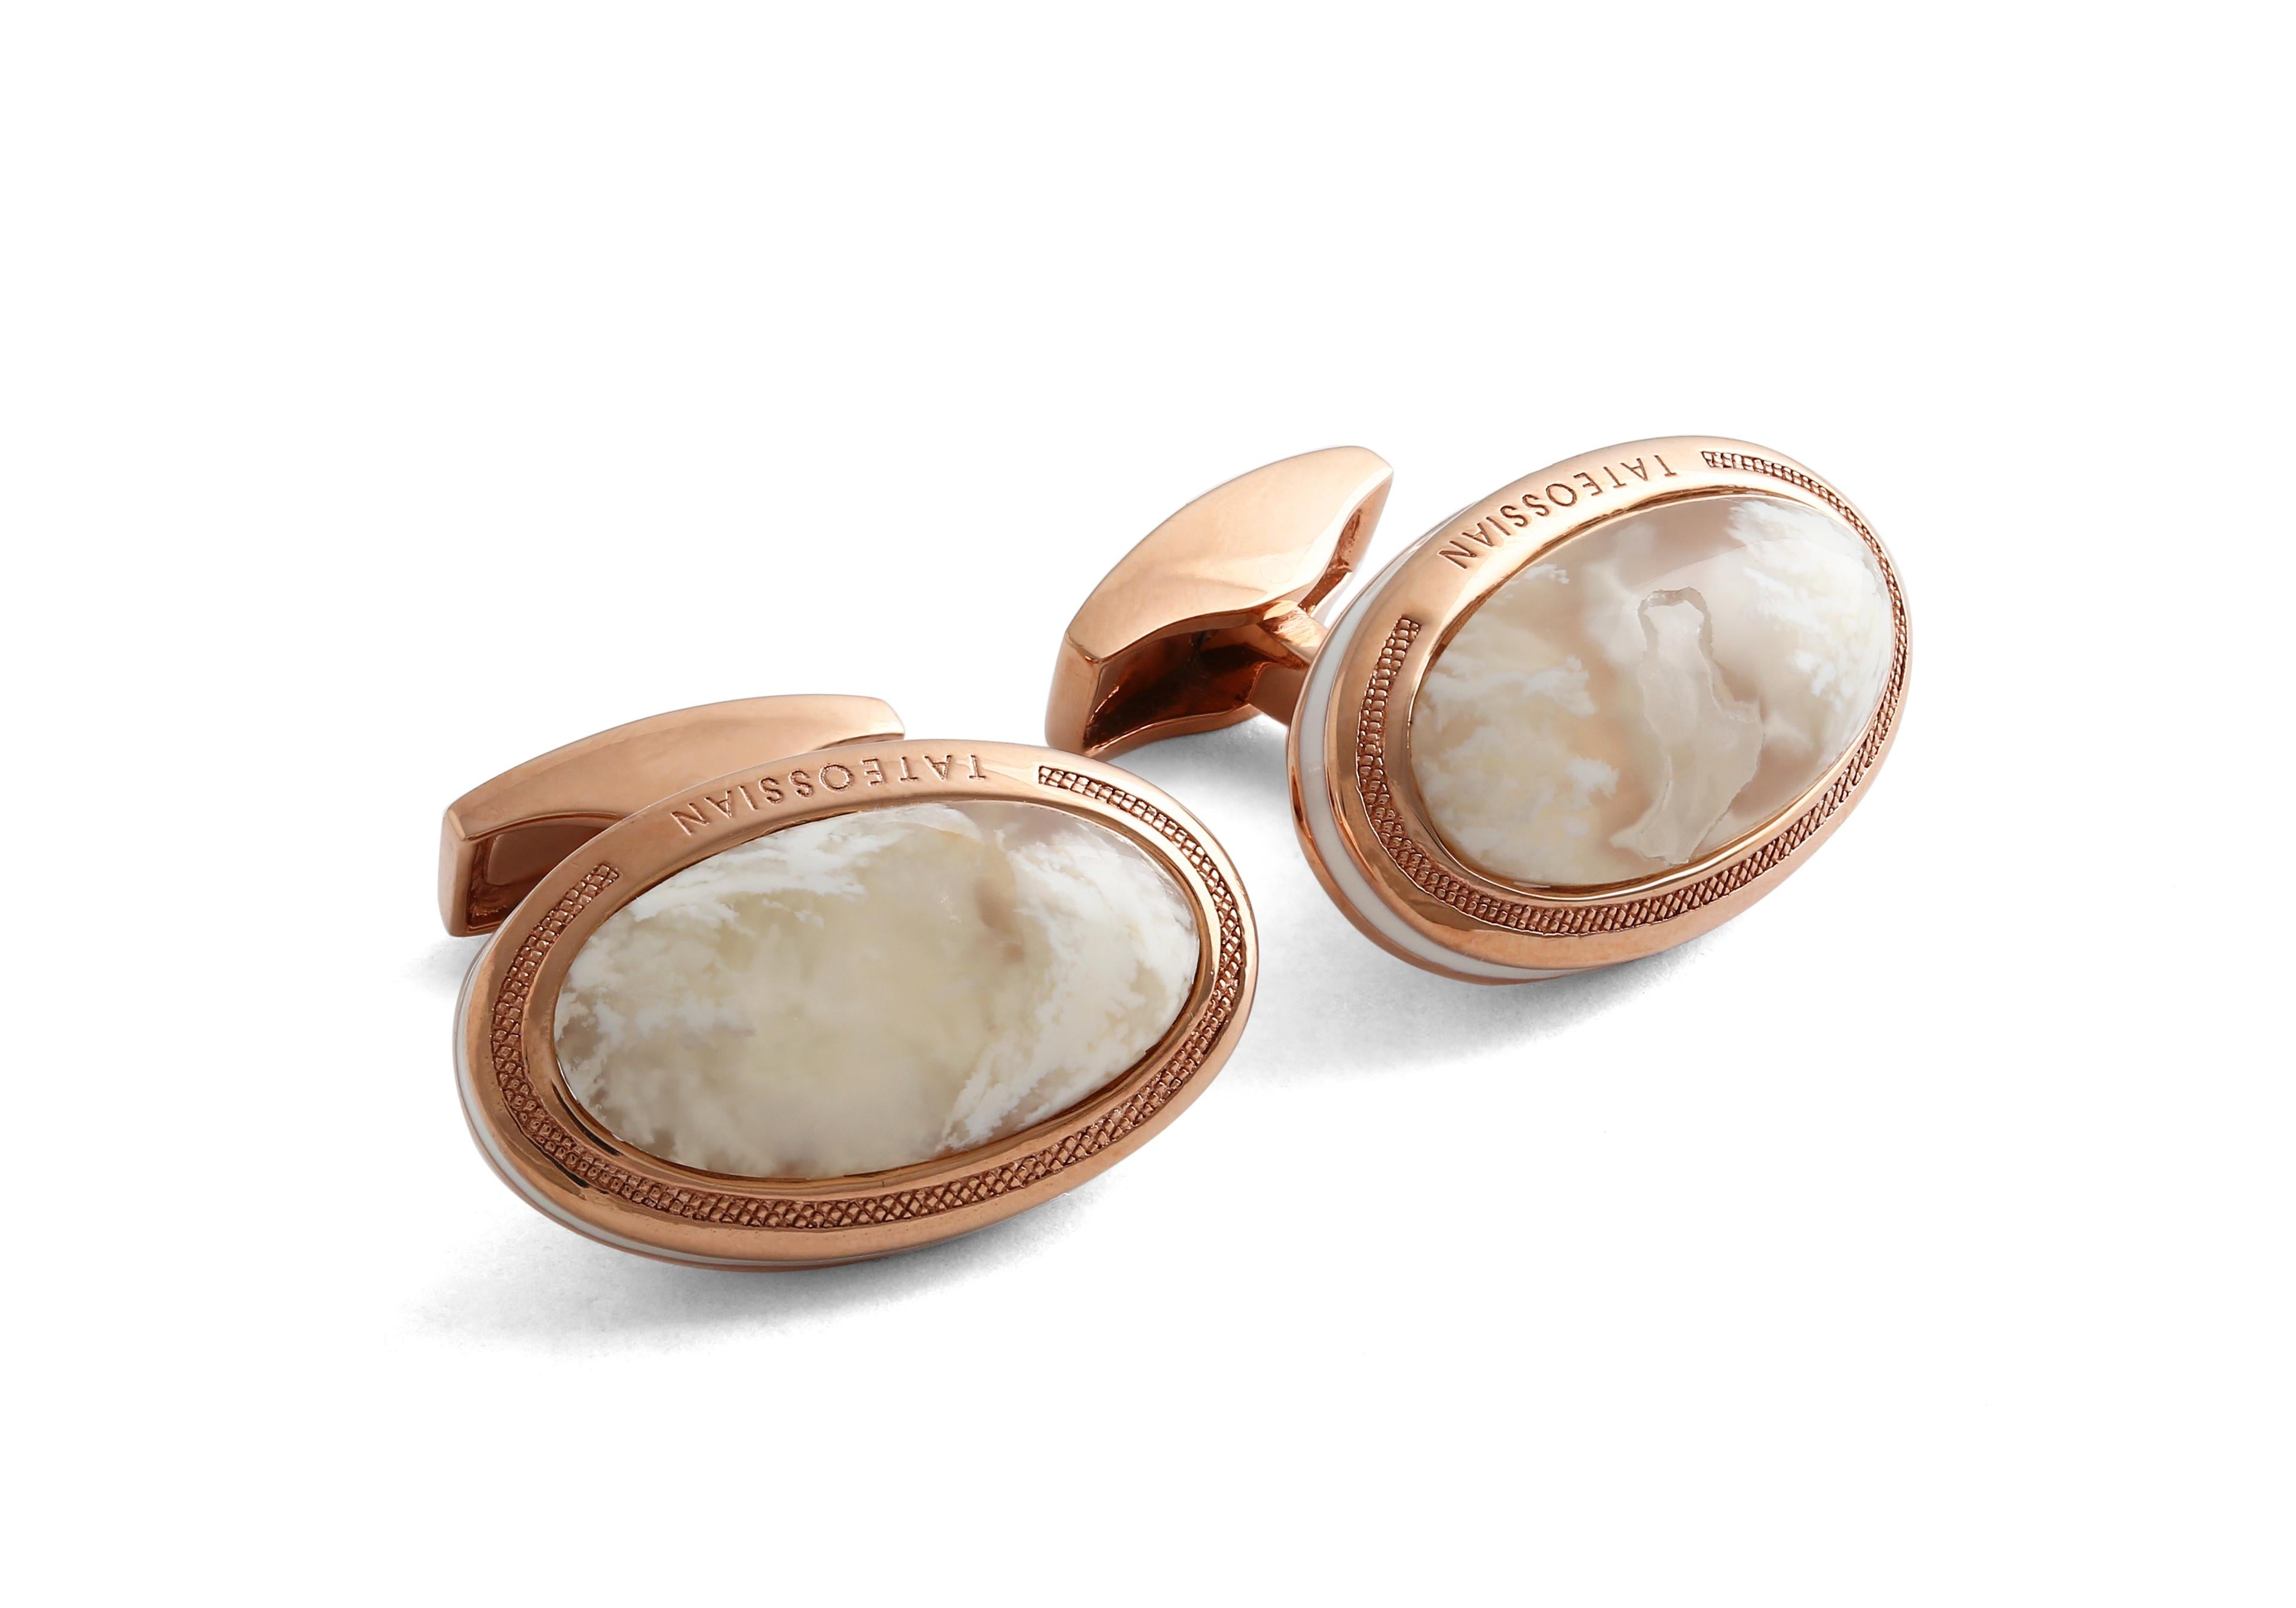 Discover the ultimate gift with our lavish rose gold oval cufflinks featuring Plume Agate from central Oregon and elegant translucent patterns. Plume Agates are generally clear or milky with flower-like patterns floating in them and are expertly